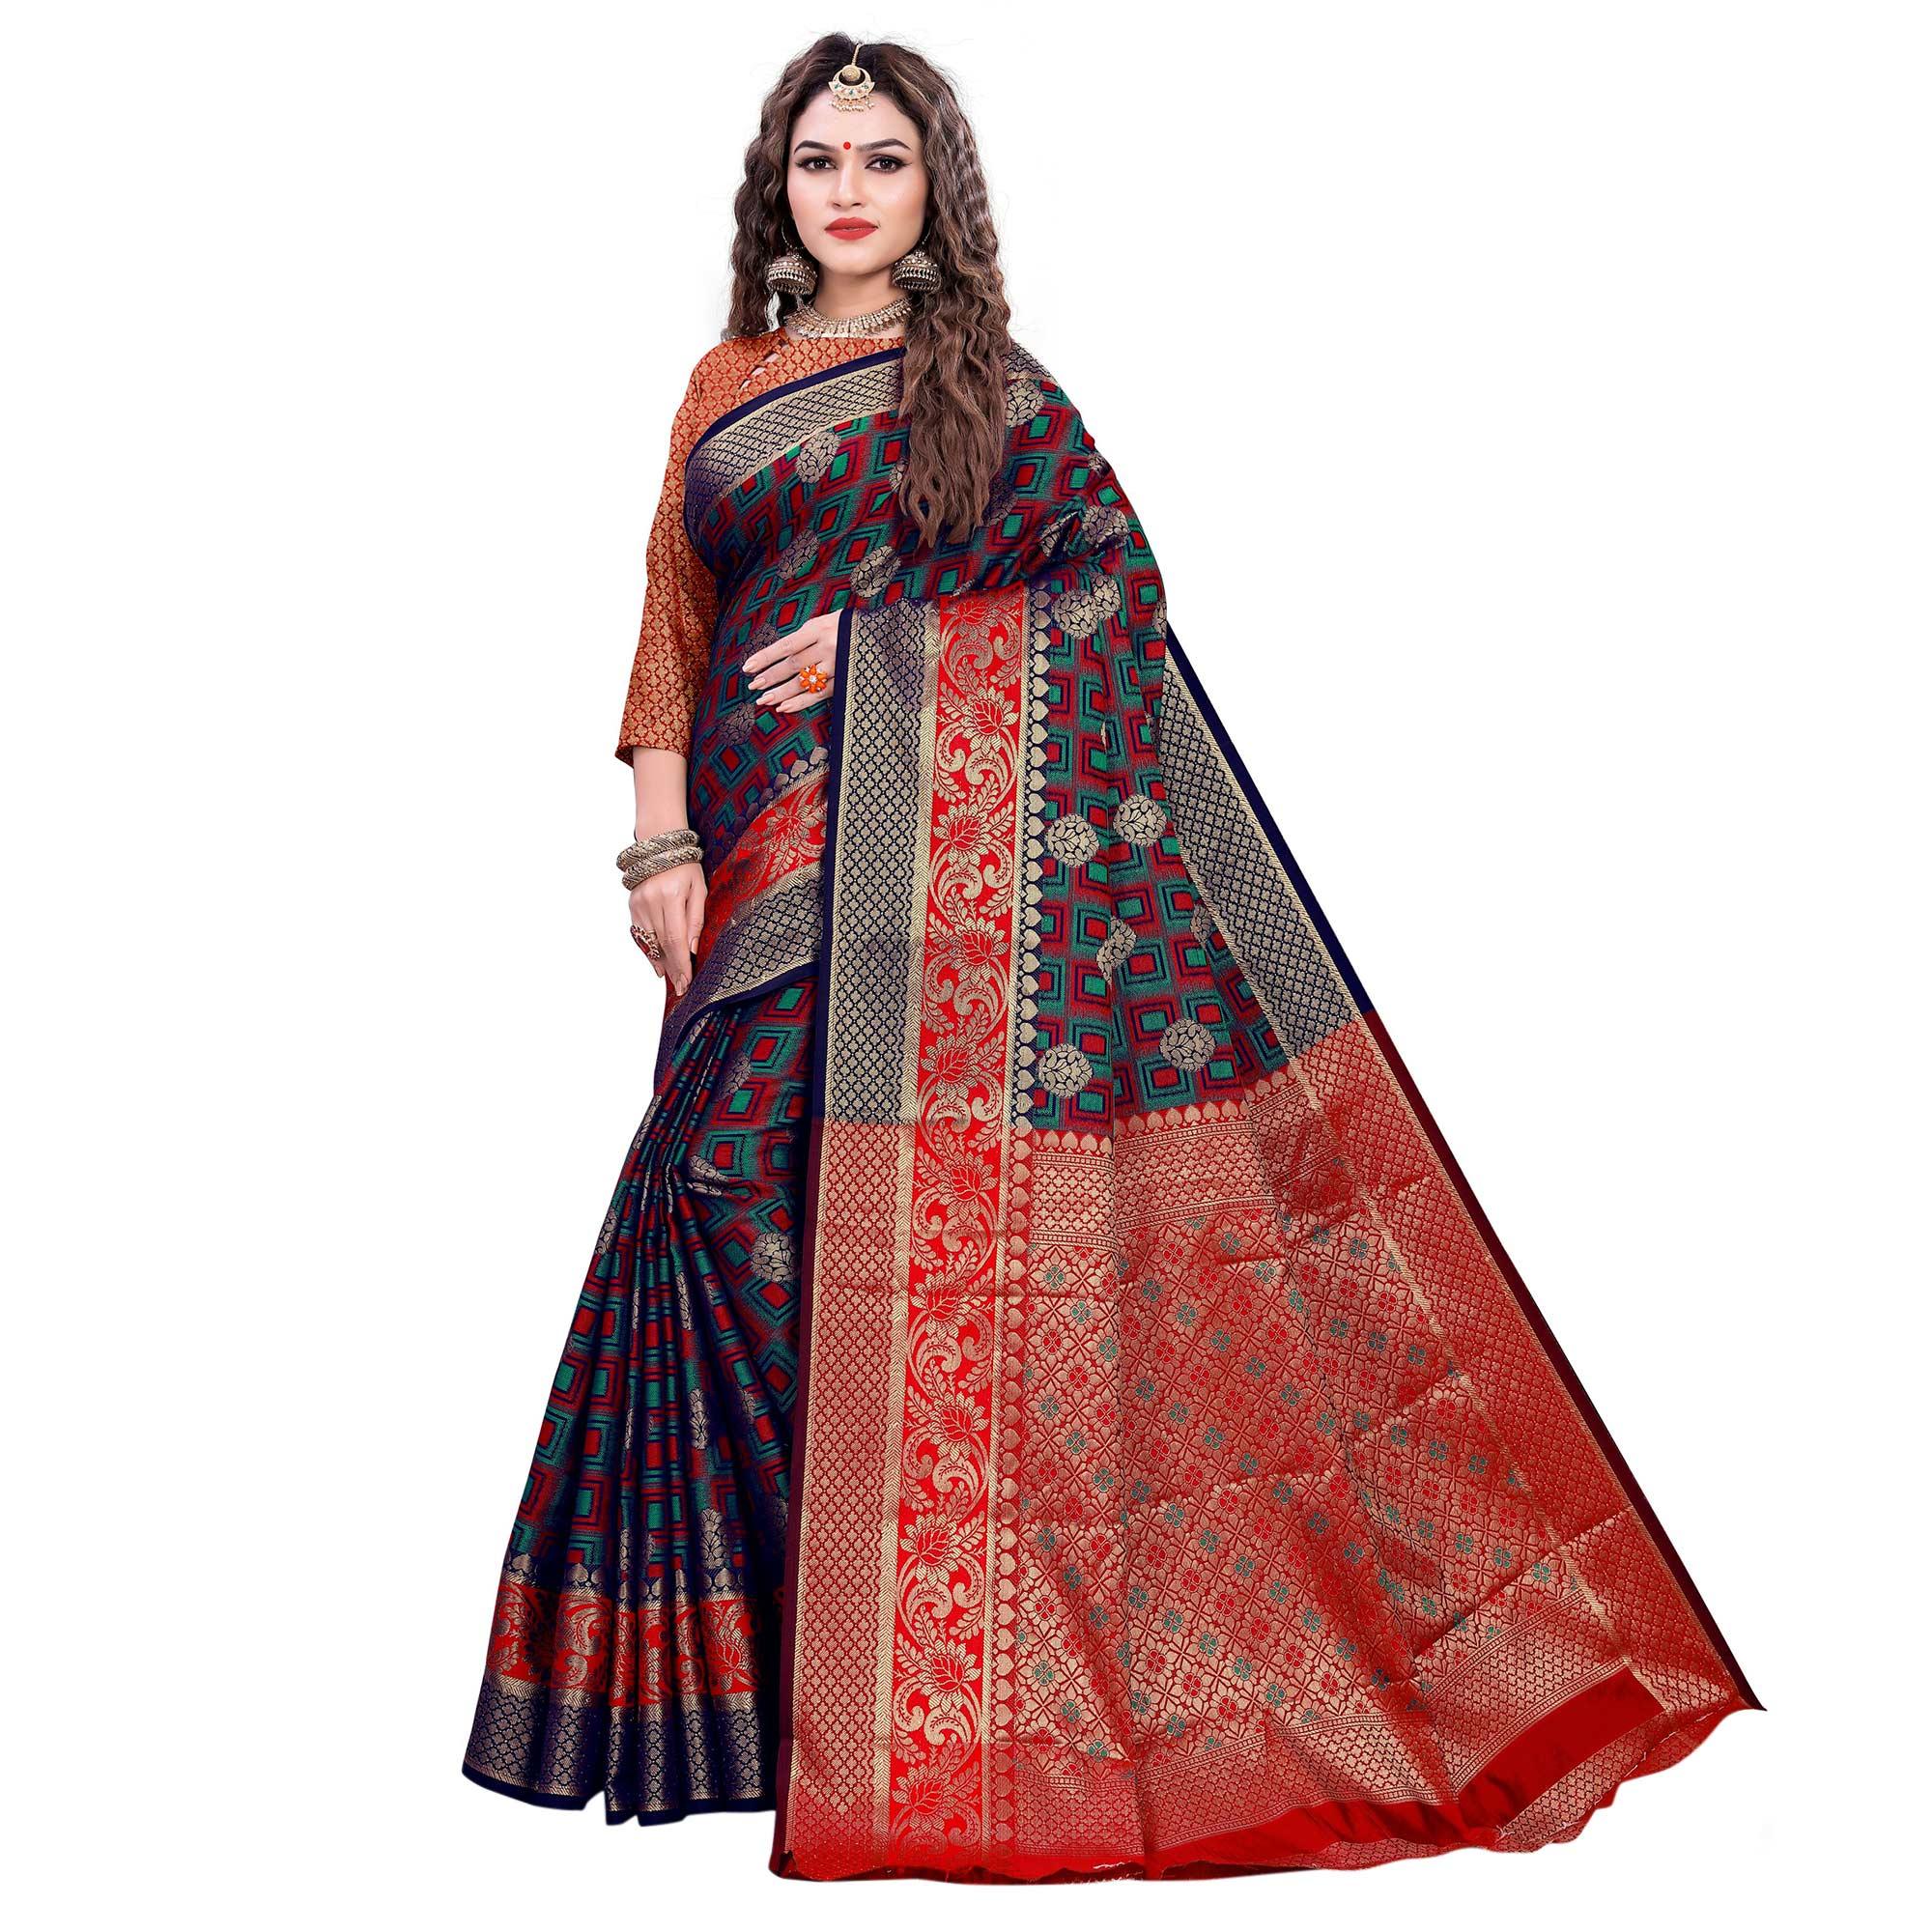 Glowing Navy Blue-Red Colored Festive Wear Woven Cotton Silk Jacquard Saree - Peachmode